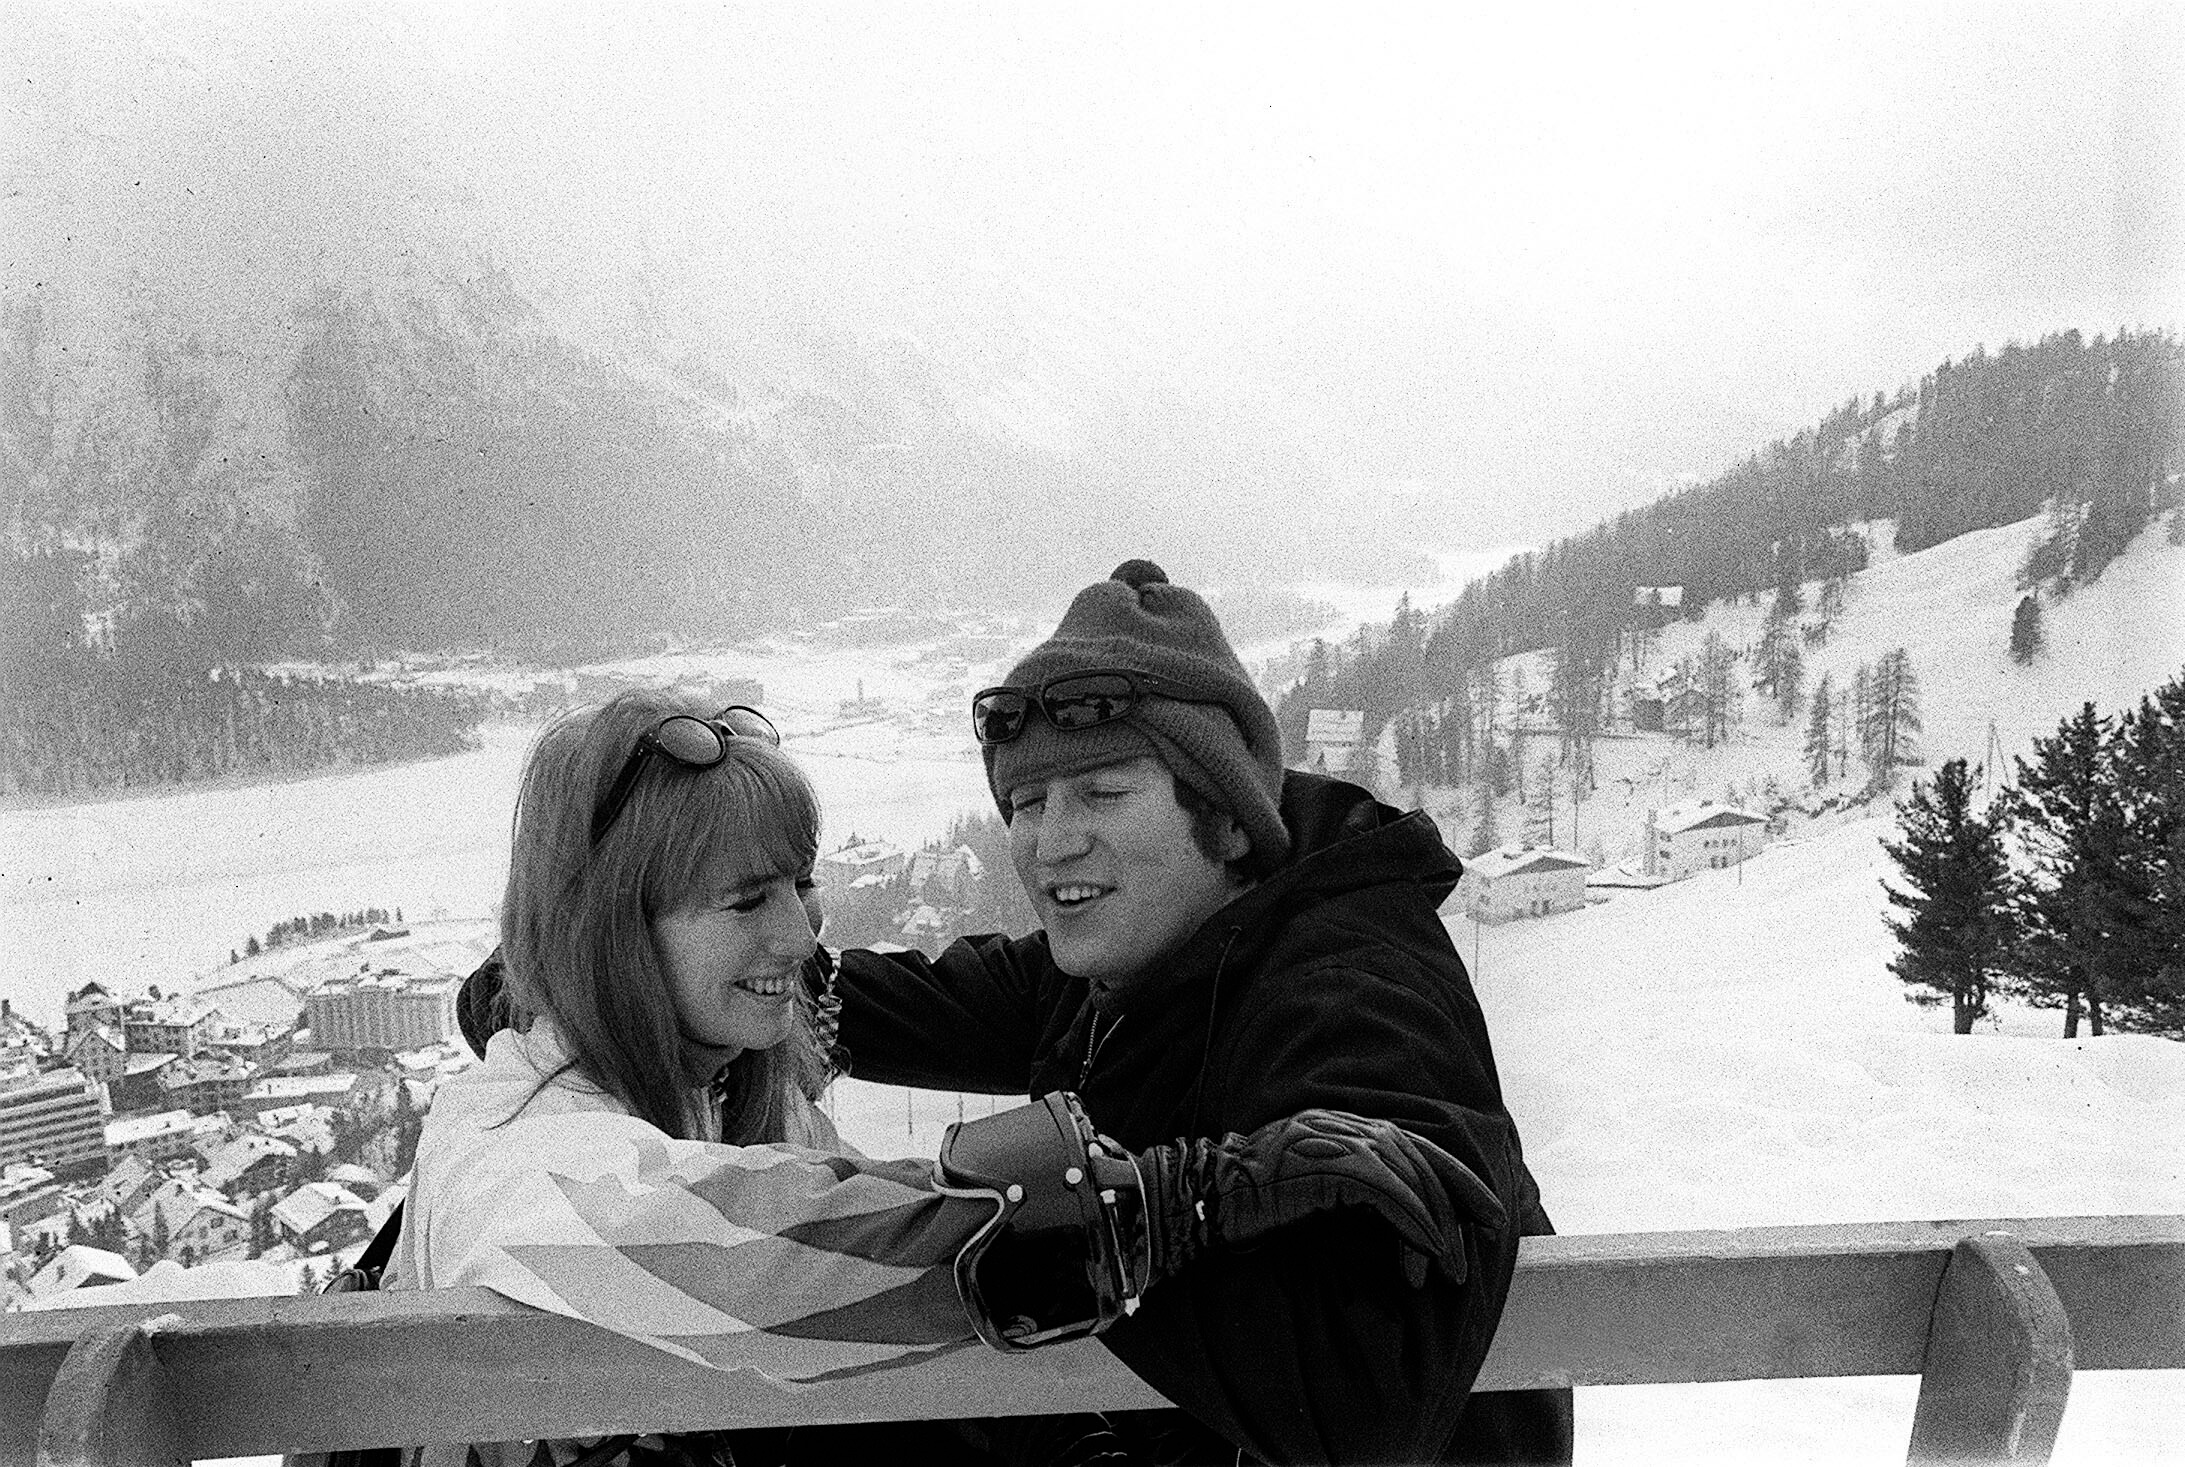 Cynthia and John Lennon laughing in the snow.